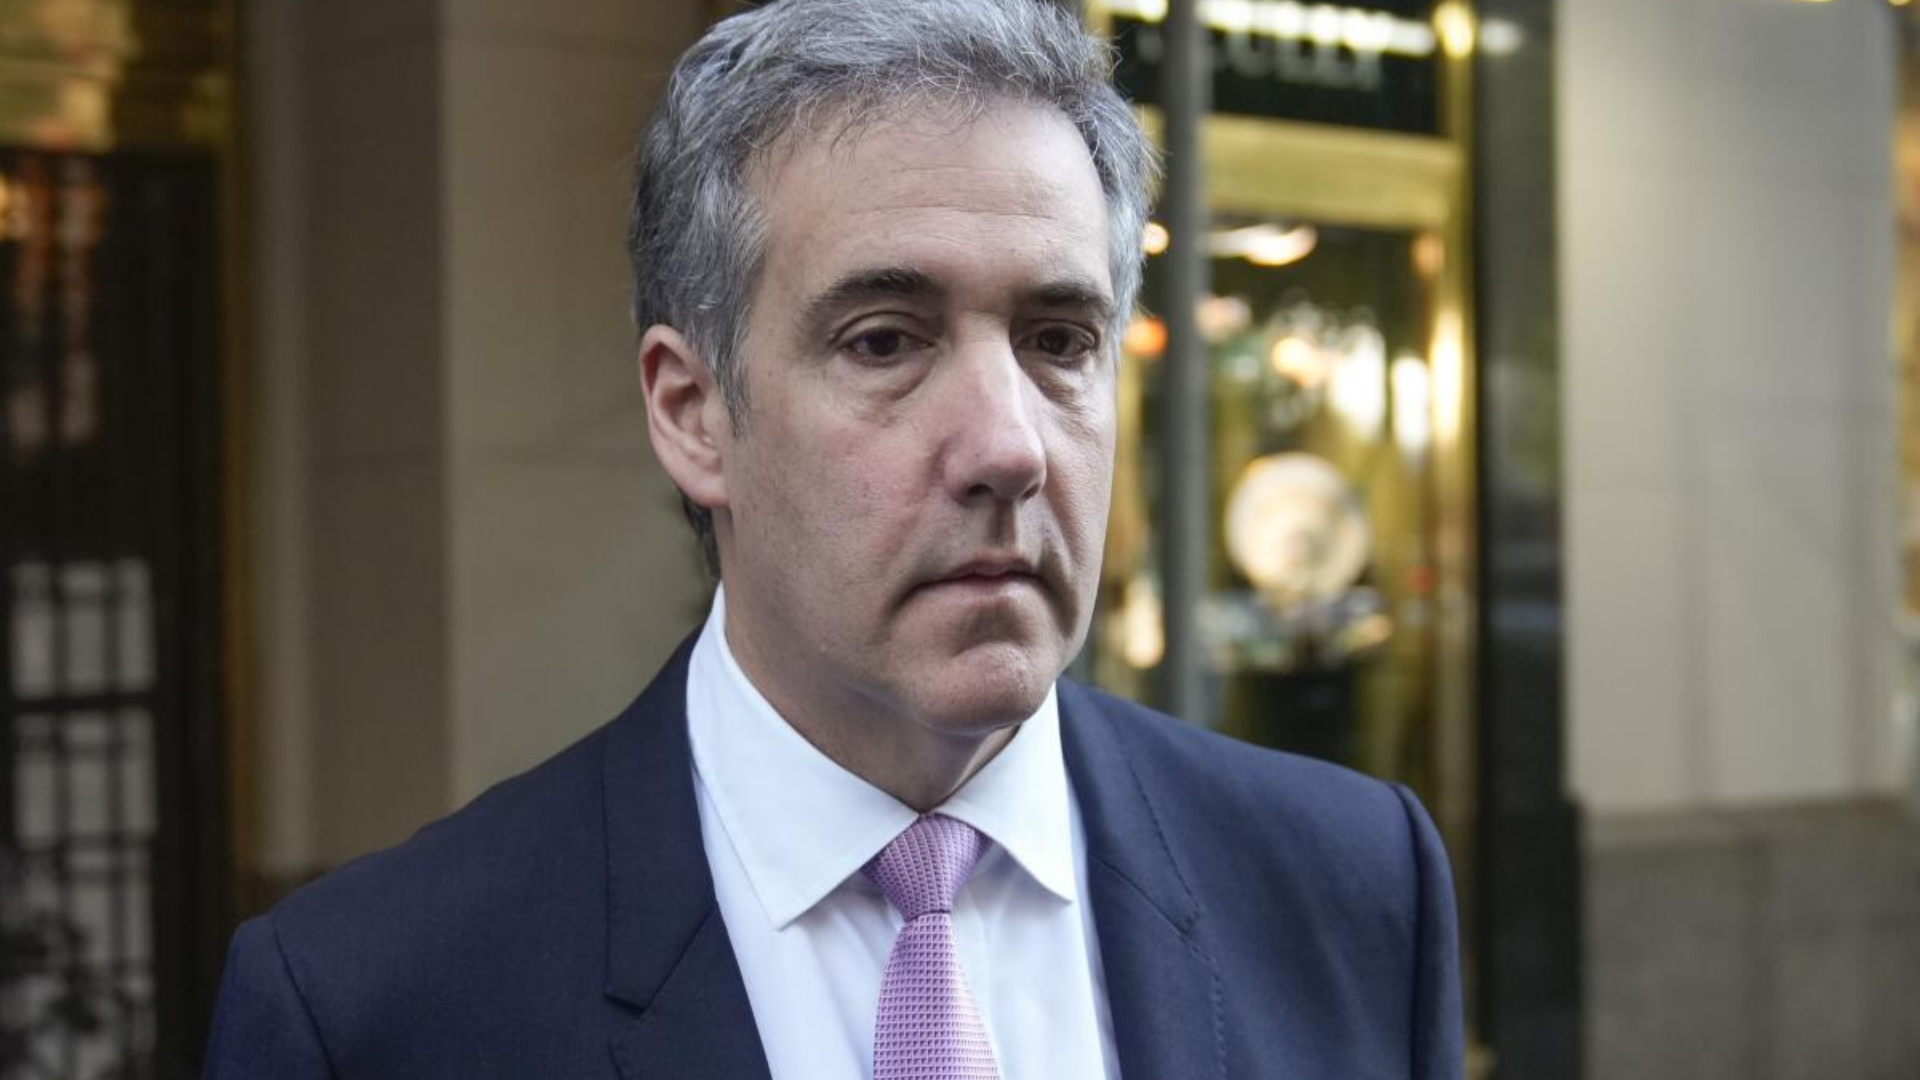 Michael Cohen says he stole from Trump’s company as defense presses key hush money trial witness